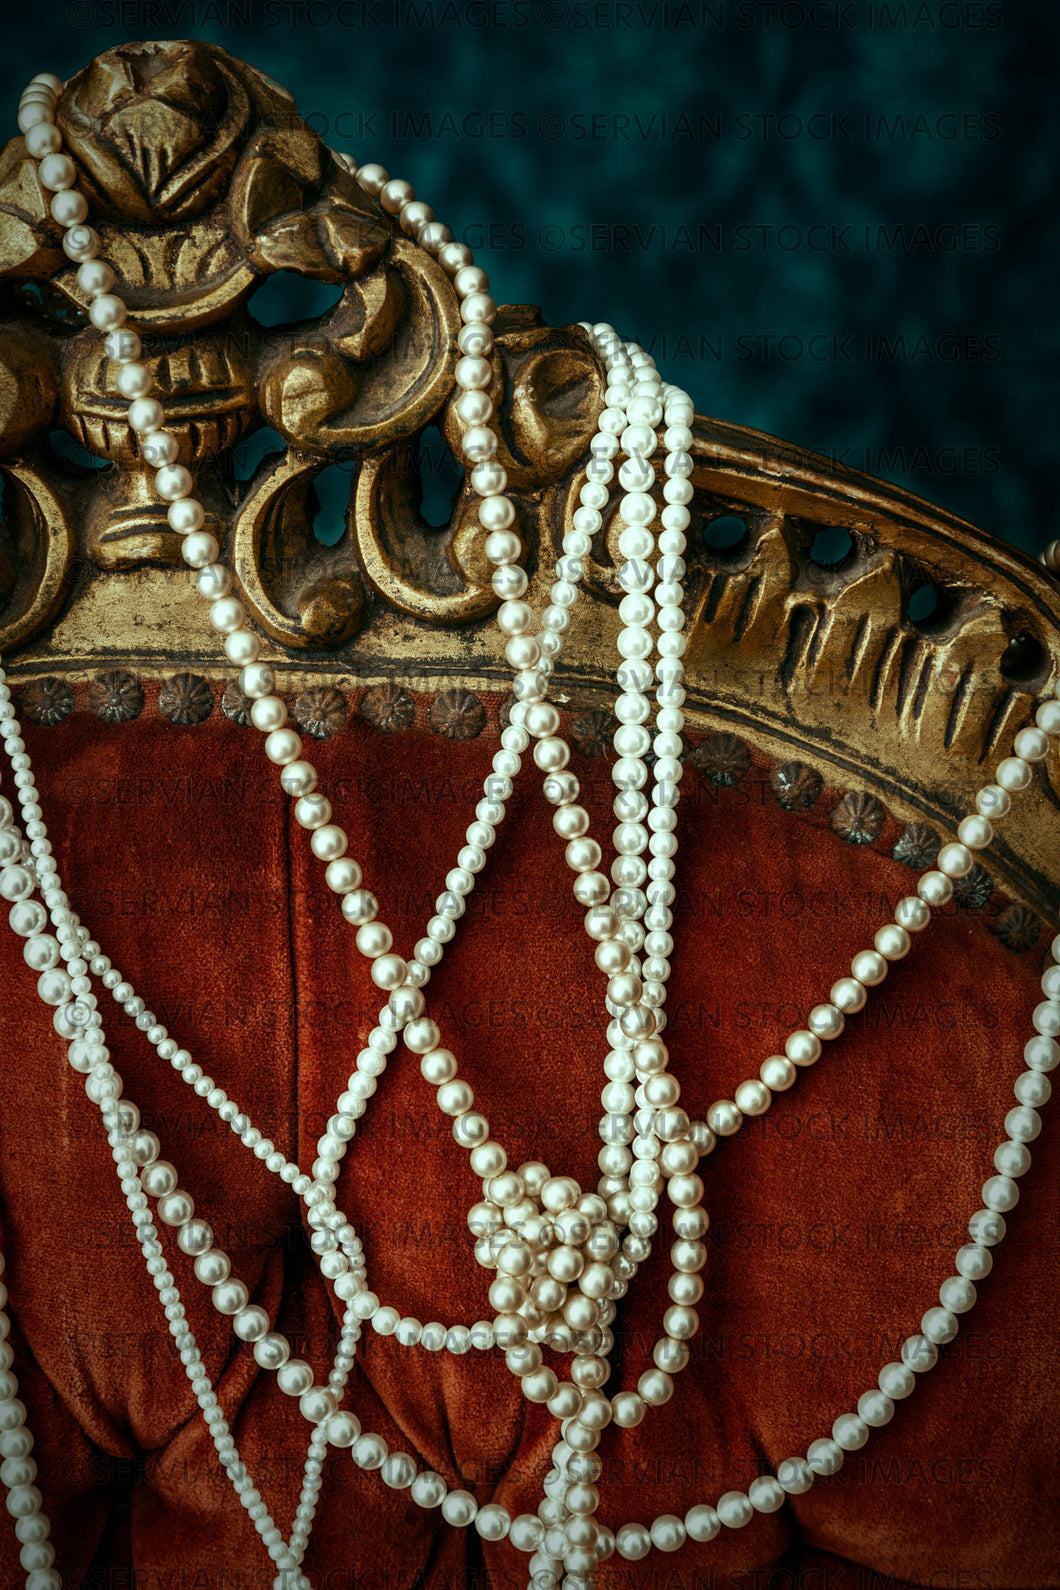 Still life -   Strings of pearls draped over a vintage chair (KS 5361)